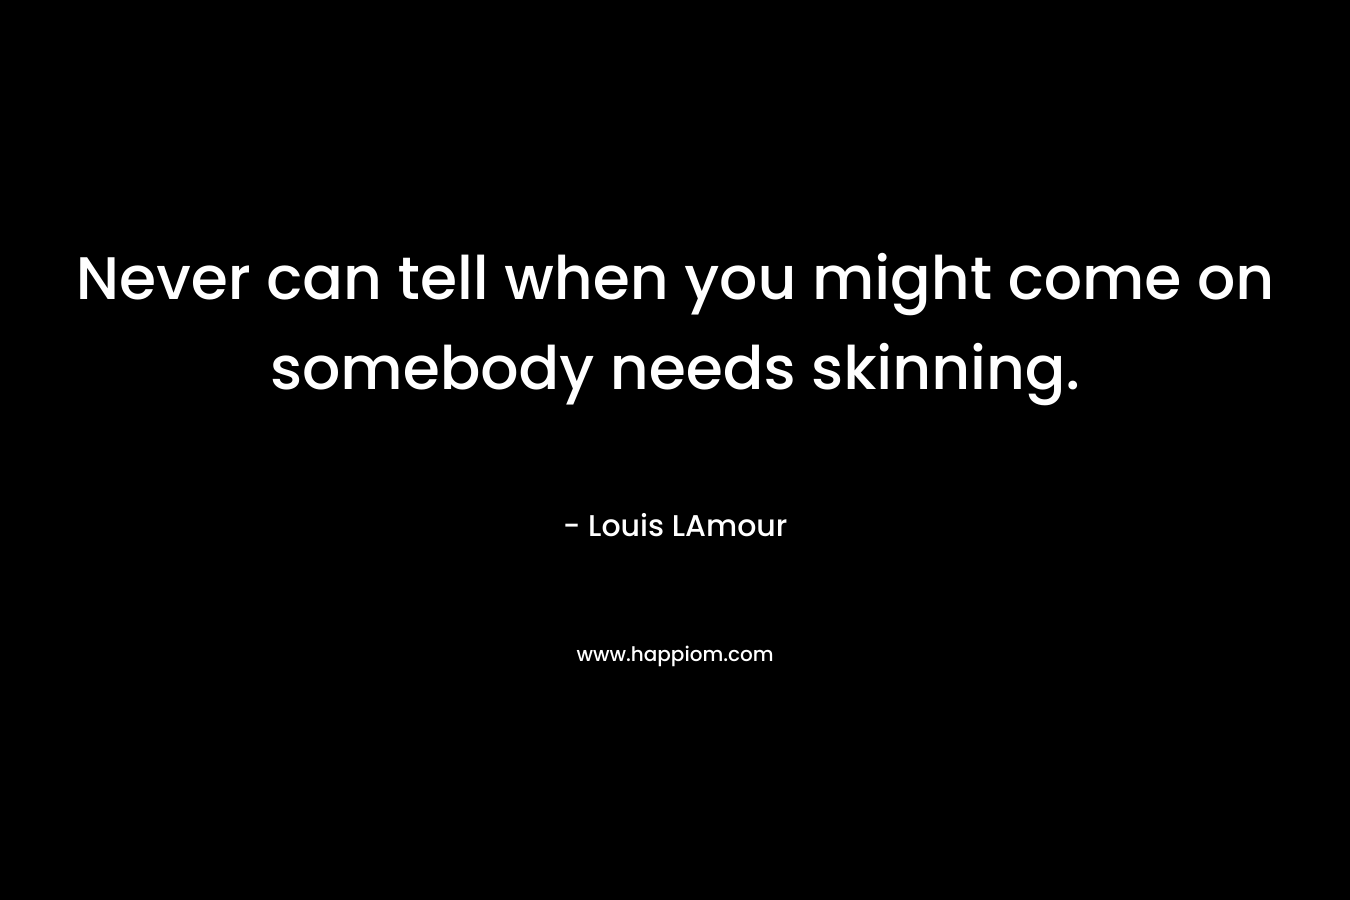 Never can tell when you might come on somebody needs skinning. – Louis LAmour